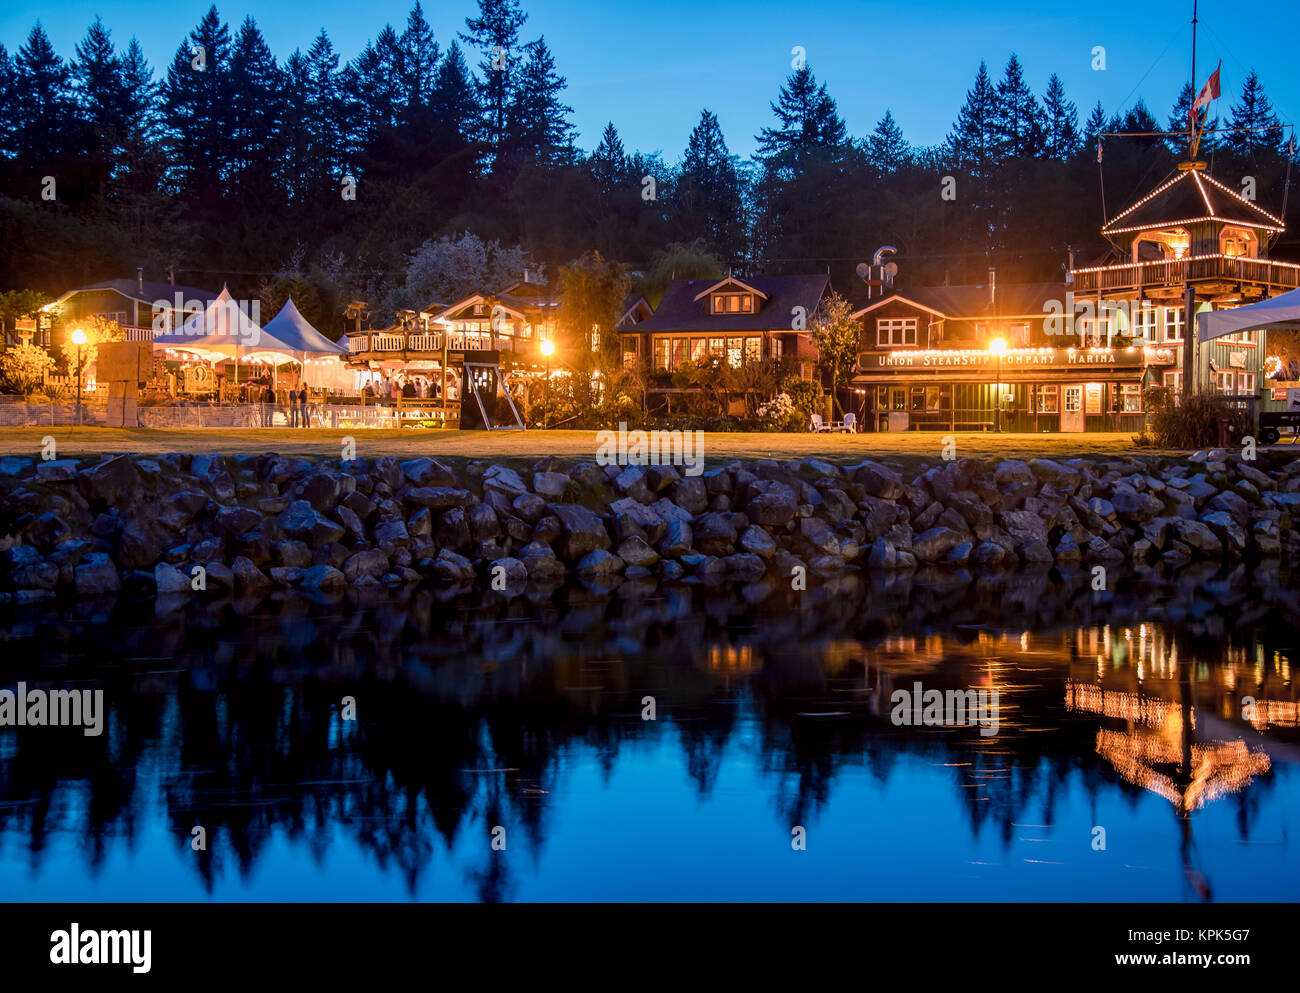 The heritage site tourist attraction Union Steamship Building in Snug Cove, Bowen Island is lit up at night welcoming tourists to the restaurant, s... Stock Photo